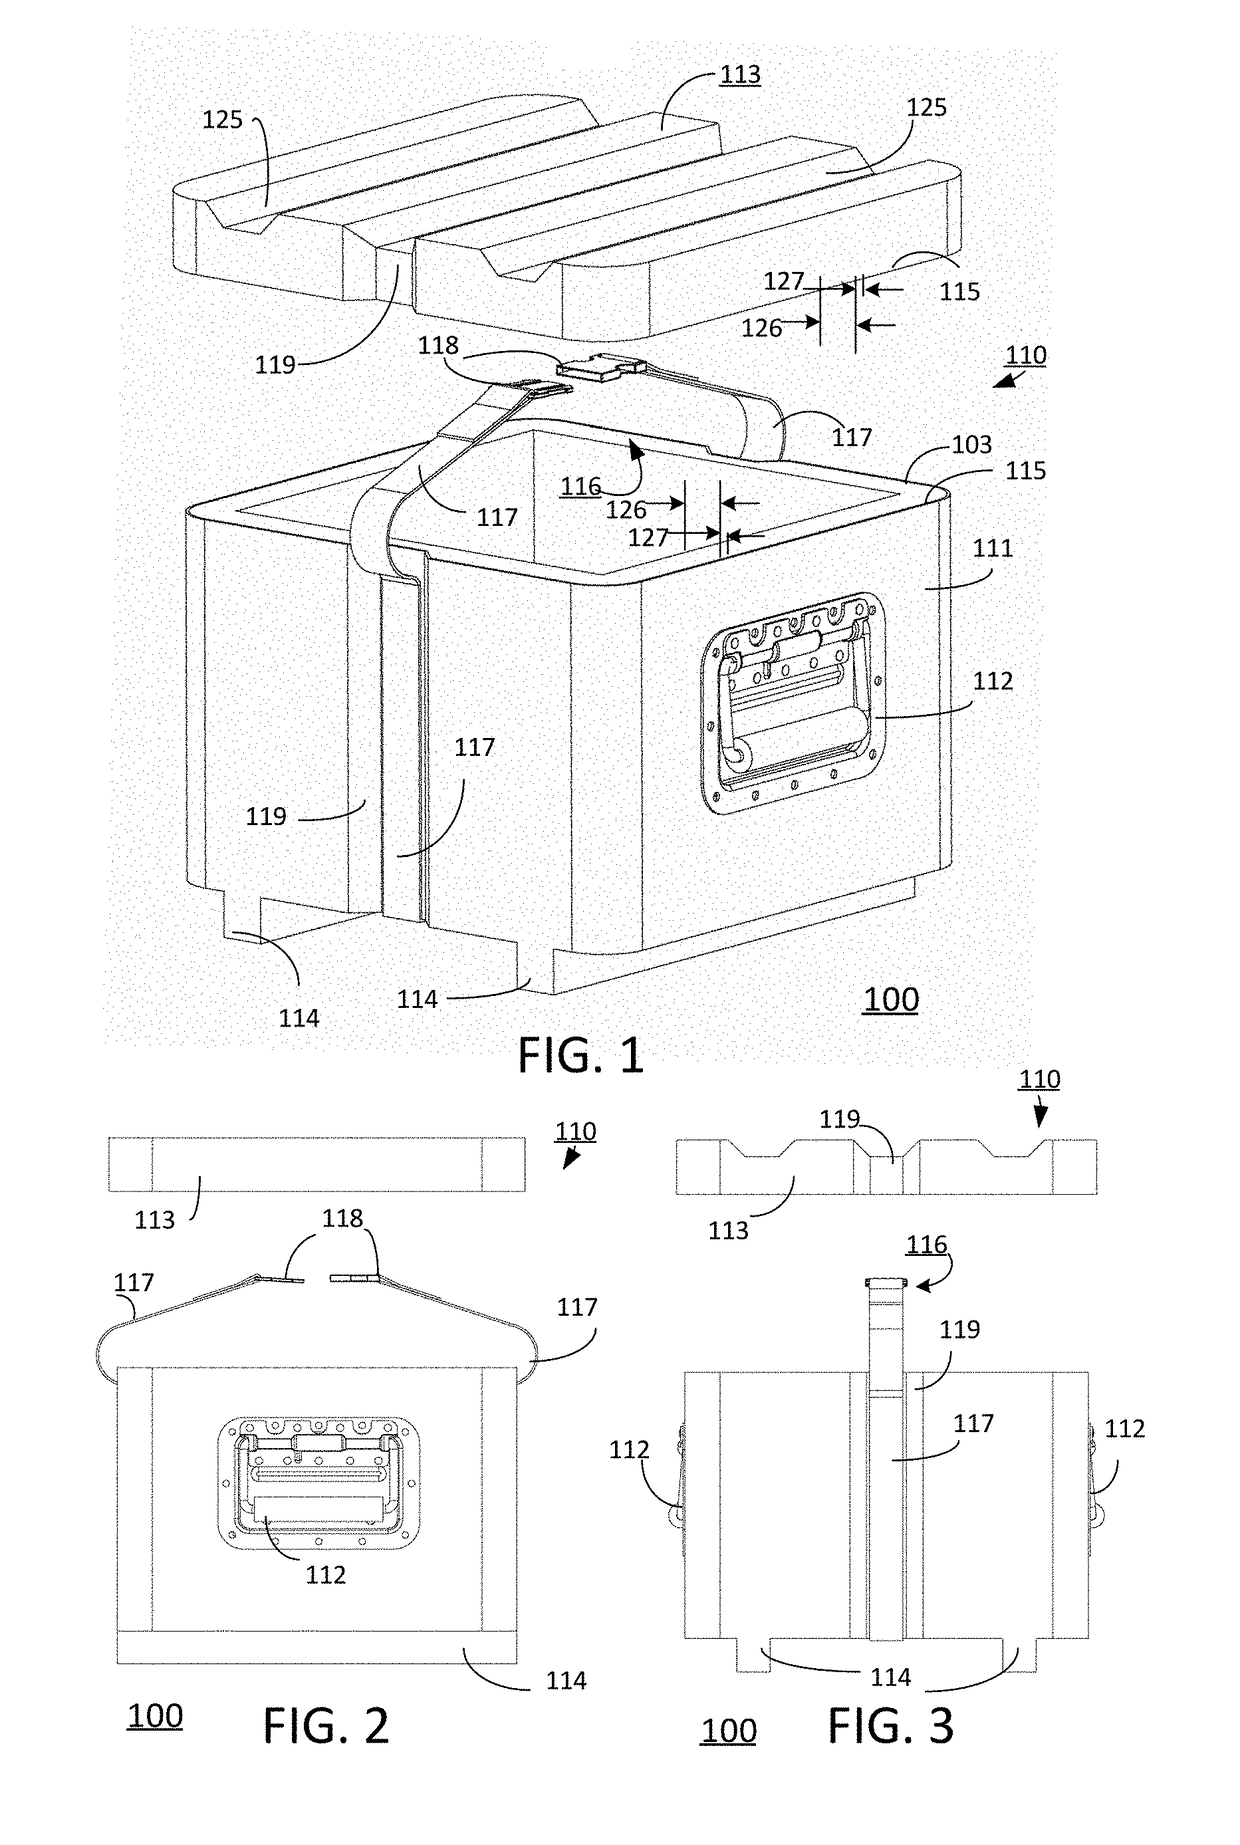 Article and method of manufacture of resiliant stackable reusable container